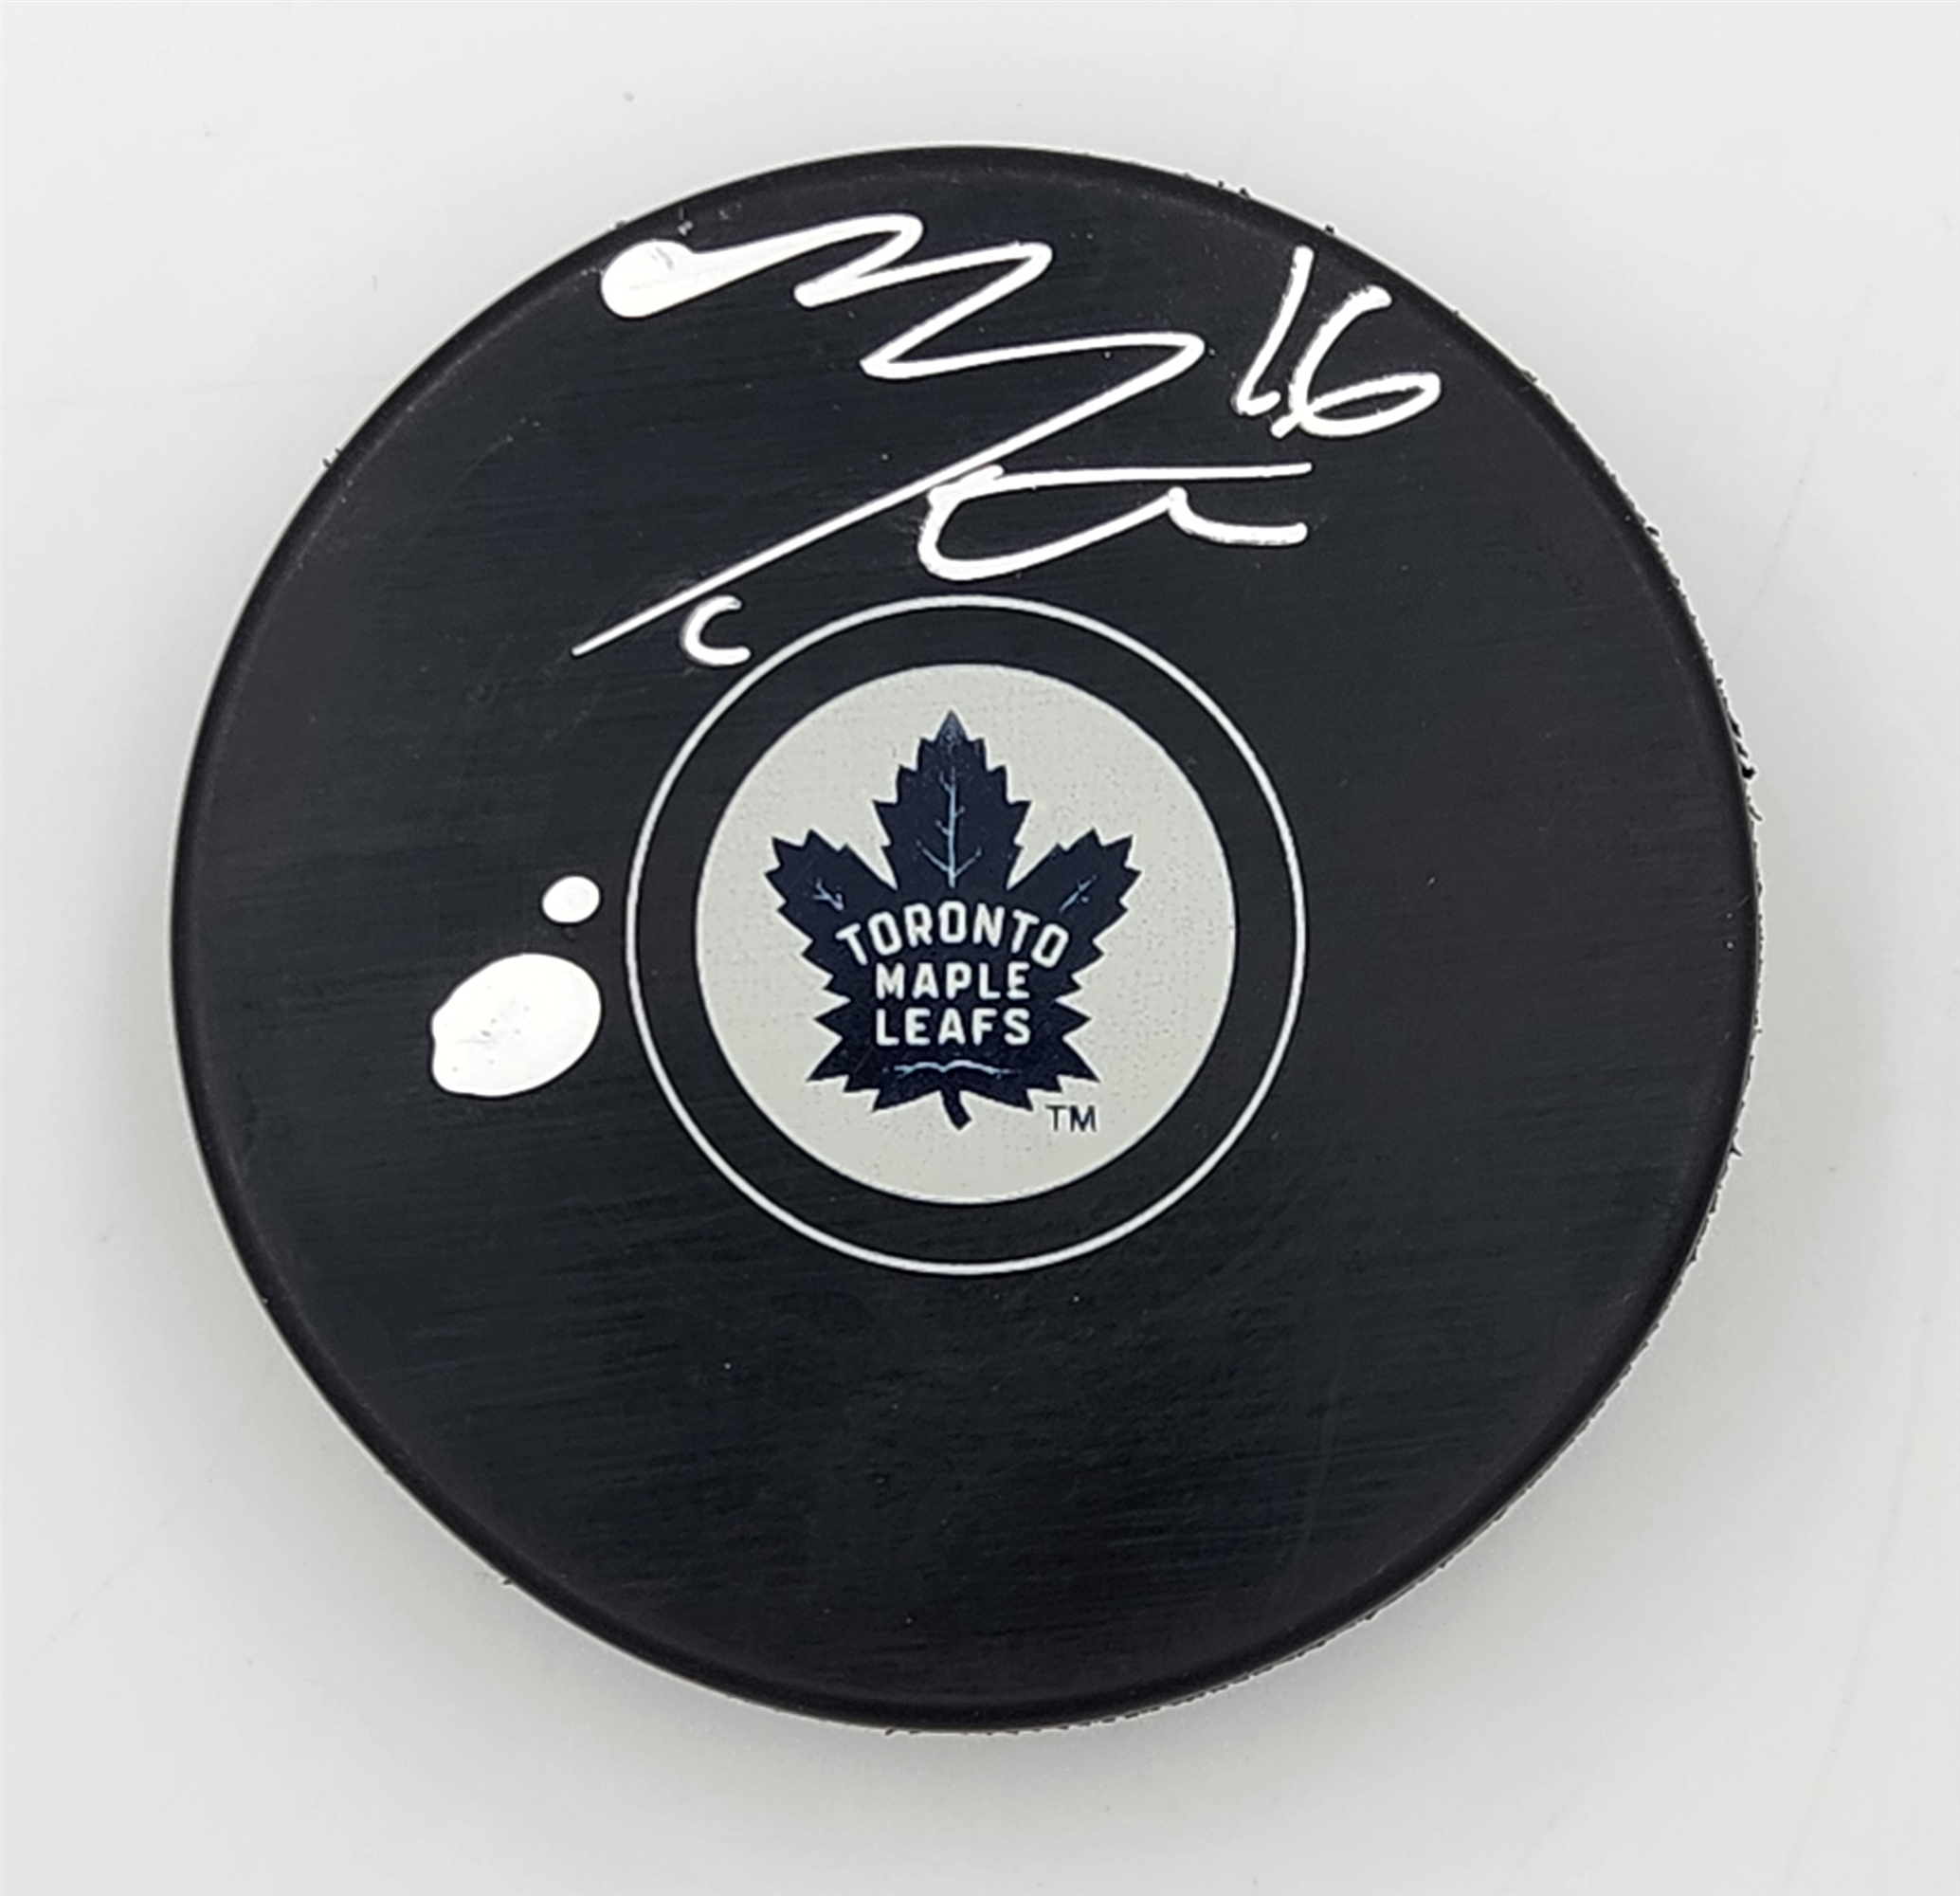 Mitch Marner Autographed Toronto Maple Leafs Hockey Puck (Flawed)